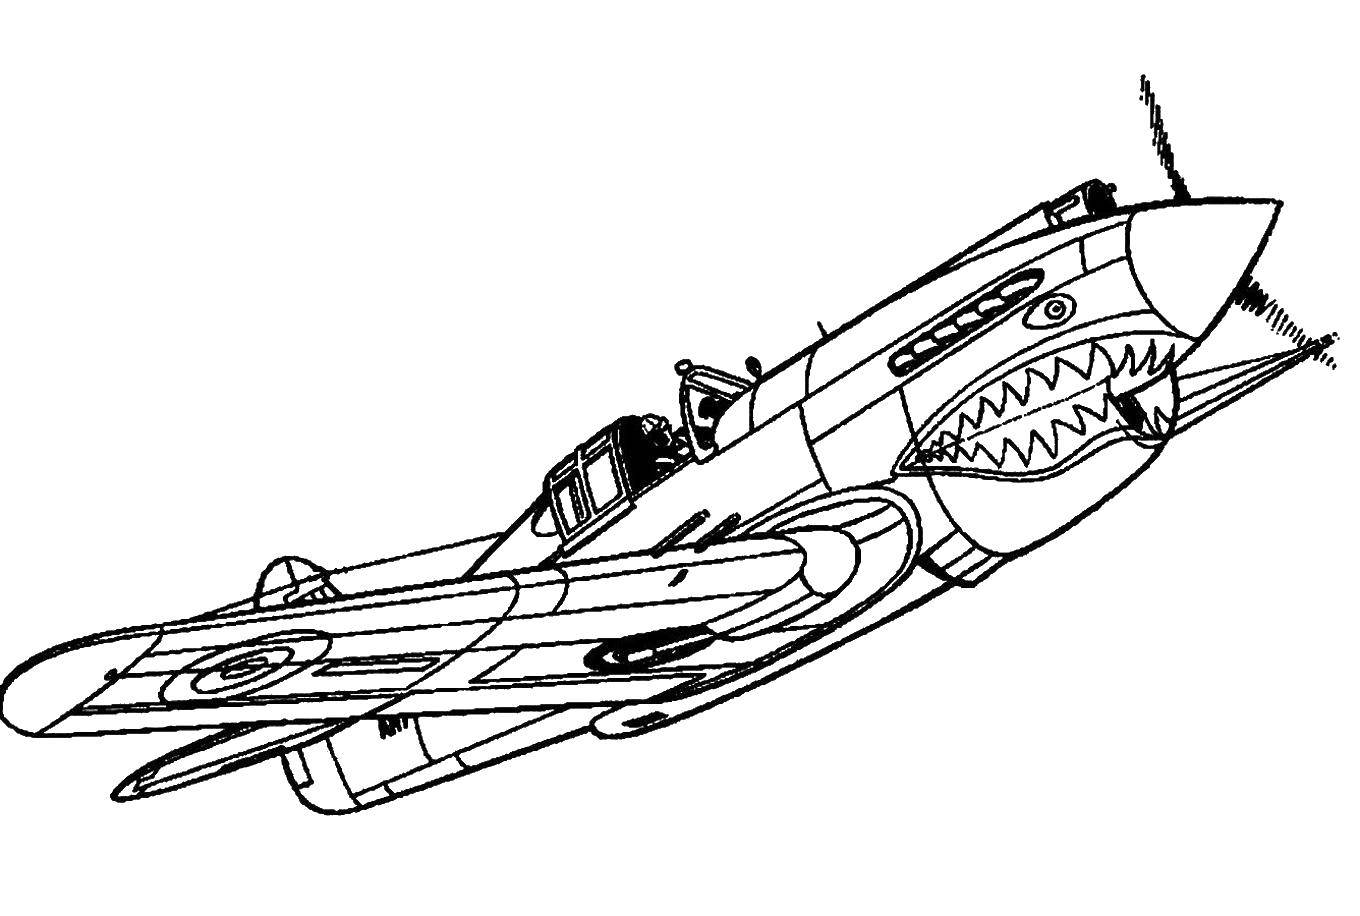 Coloring Plane shark. Category The planes. Tags:  airplane, shark.